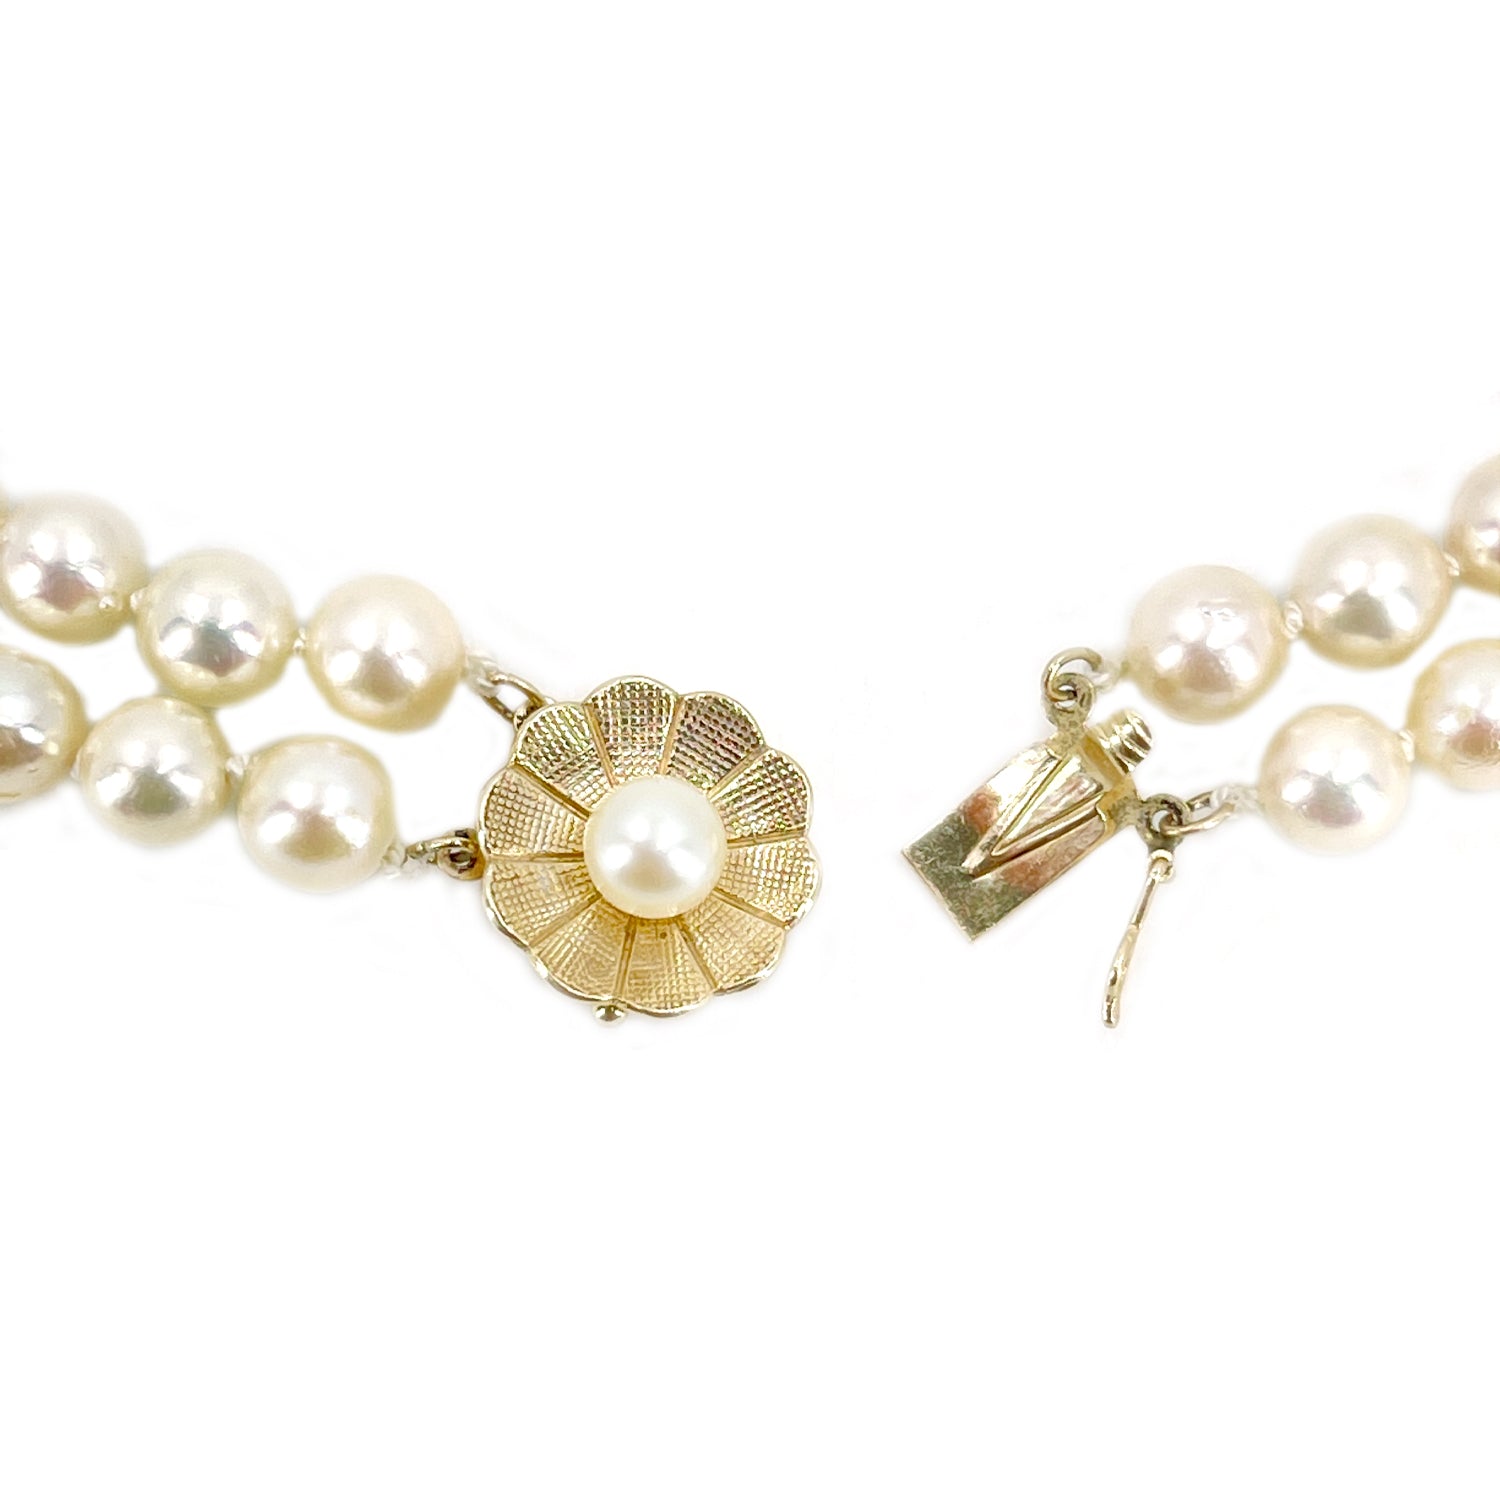 Vintage Double Strand Floral Japanese Saltwater Cultured Akoya Pearl Necklace - 14K Yellow Gold 22.75 & 24 Inch